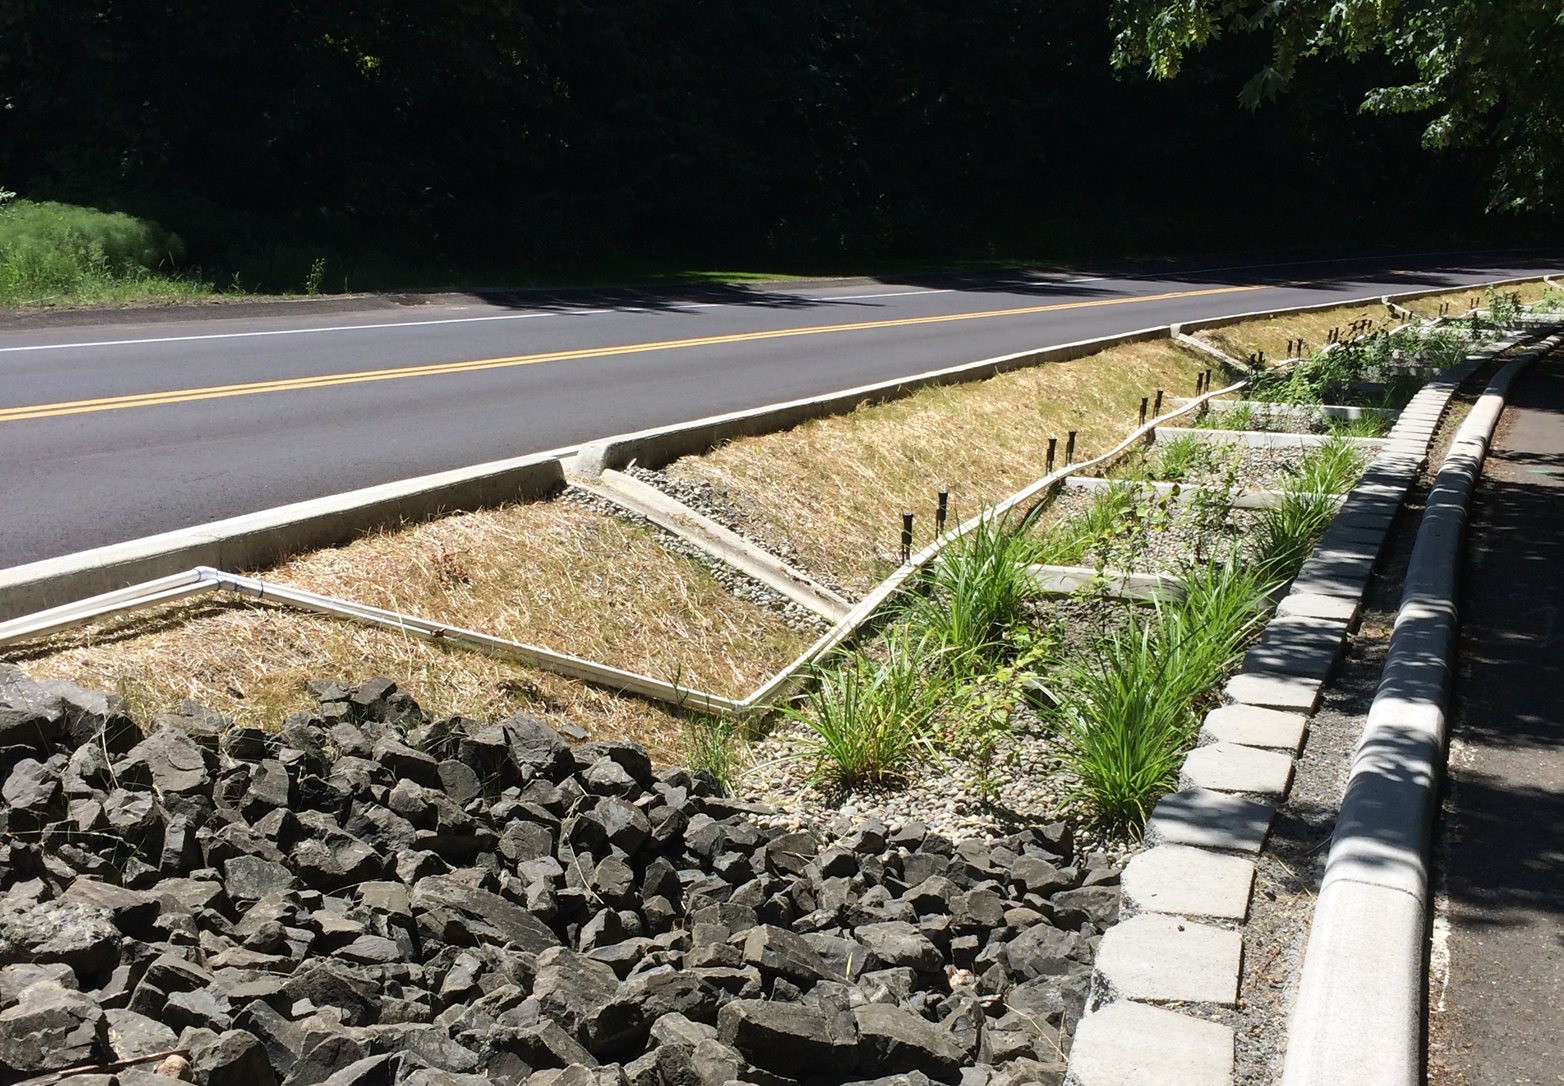 Stormwater system with channels of rocks, gravel and grasses next to an empty road. 